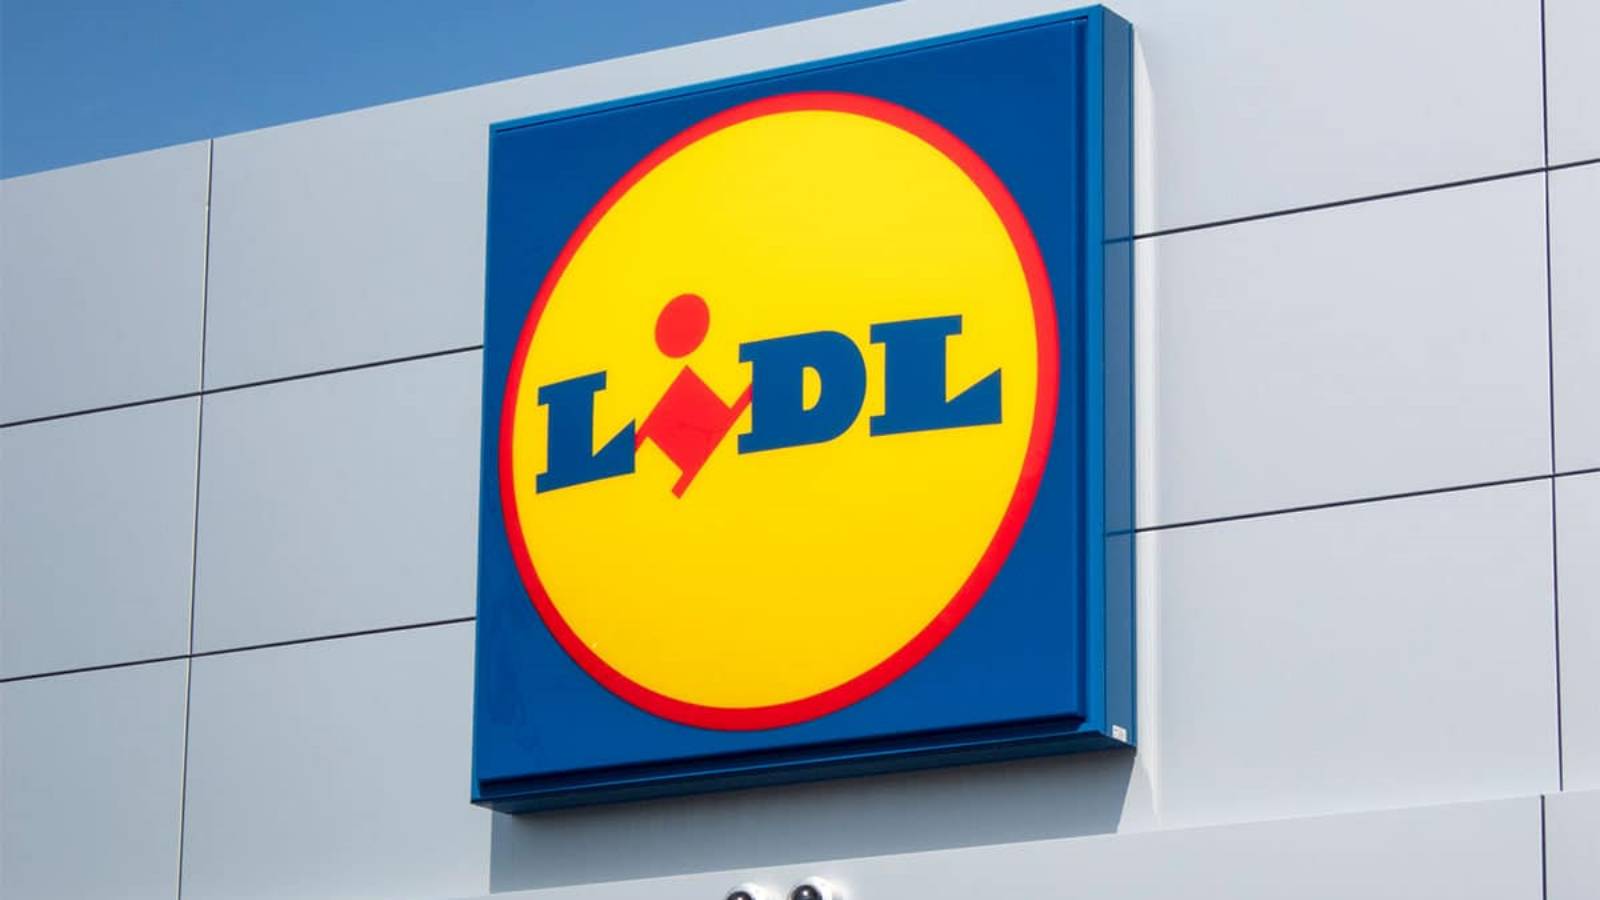 LIDL Romania relearning